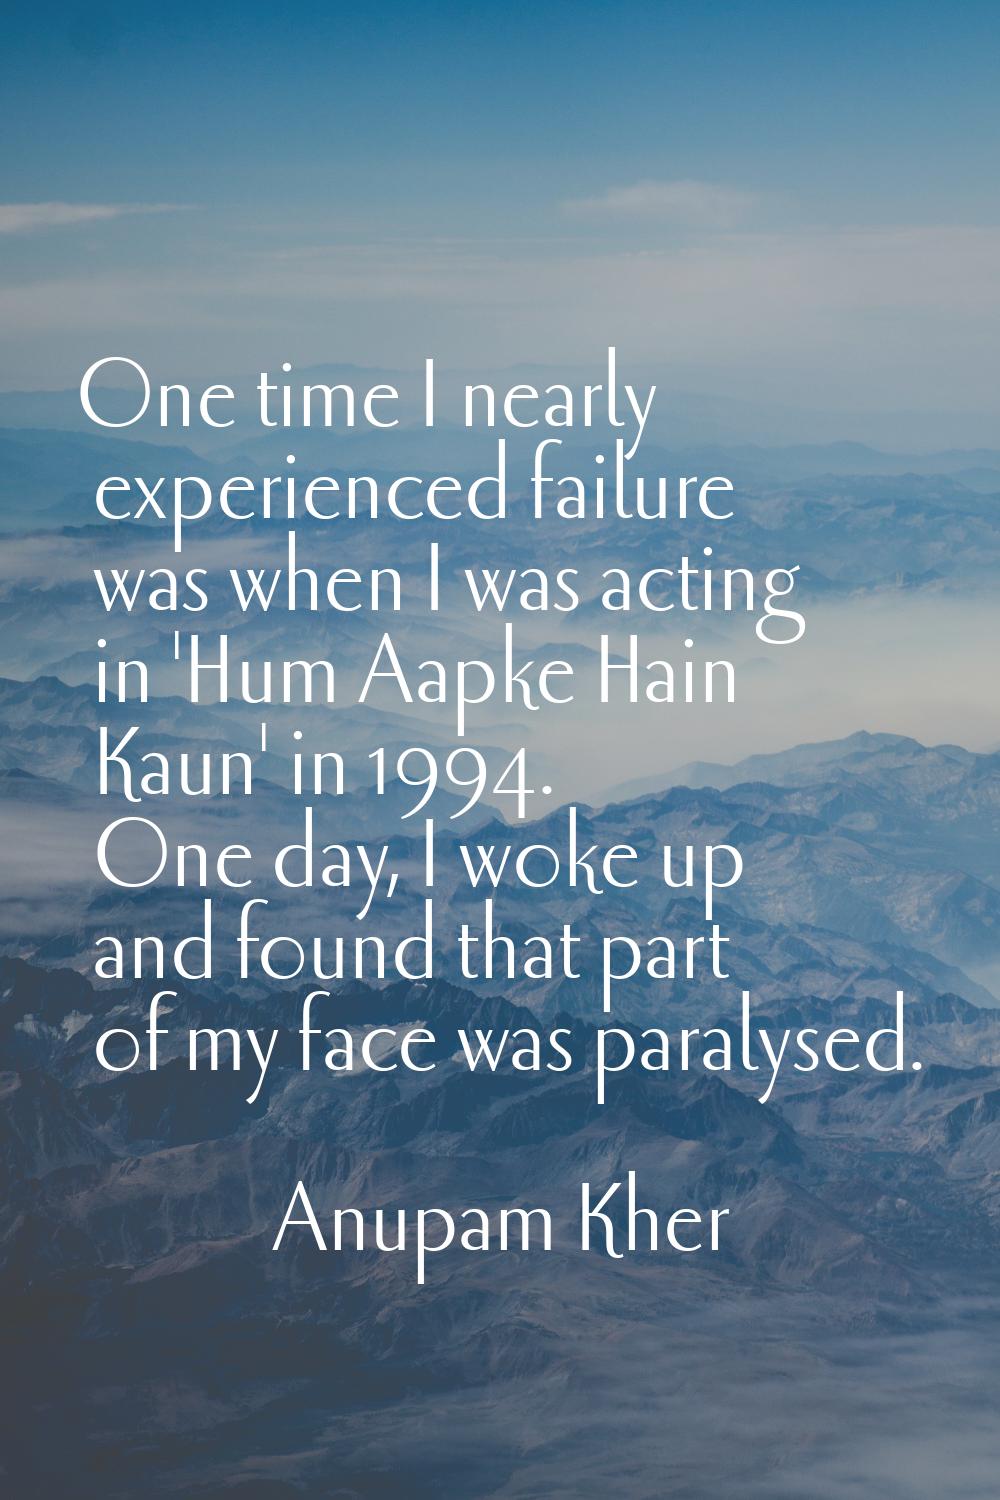 One time I nearly experienced failure was when I was acting in 'Hum Aapke Hain Kaun' in 1994. One d